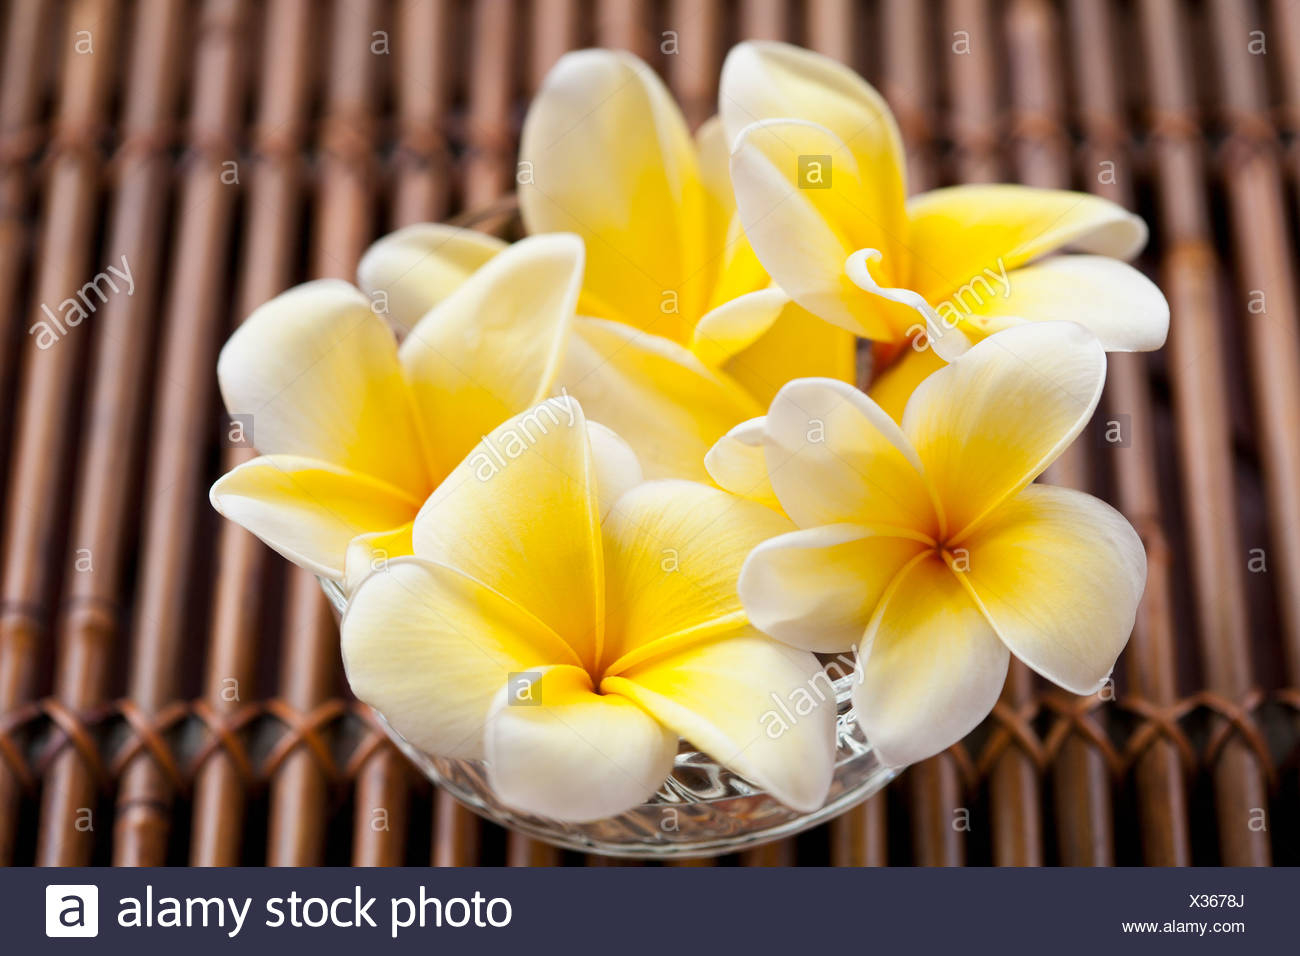 Vase With Plumeria Bouquet Stock Photo 277347298 Alamy intended for size 1300 X 956